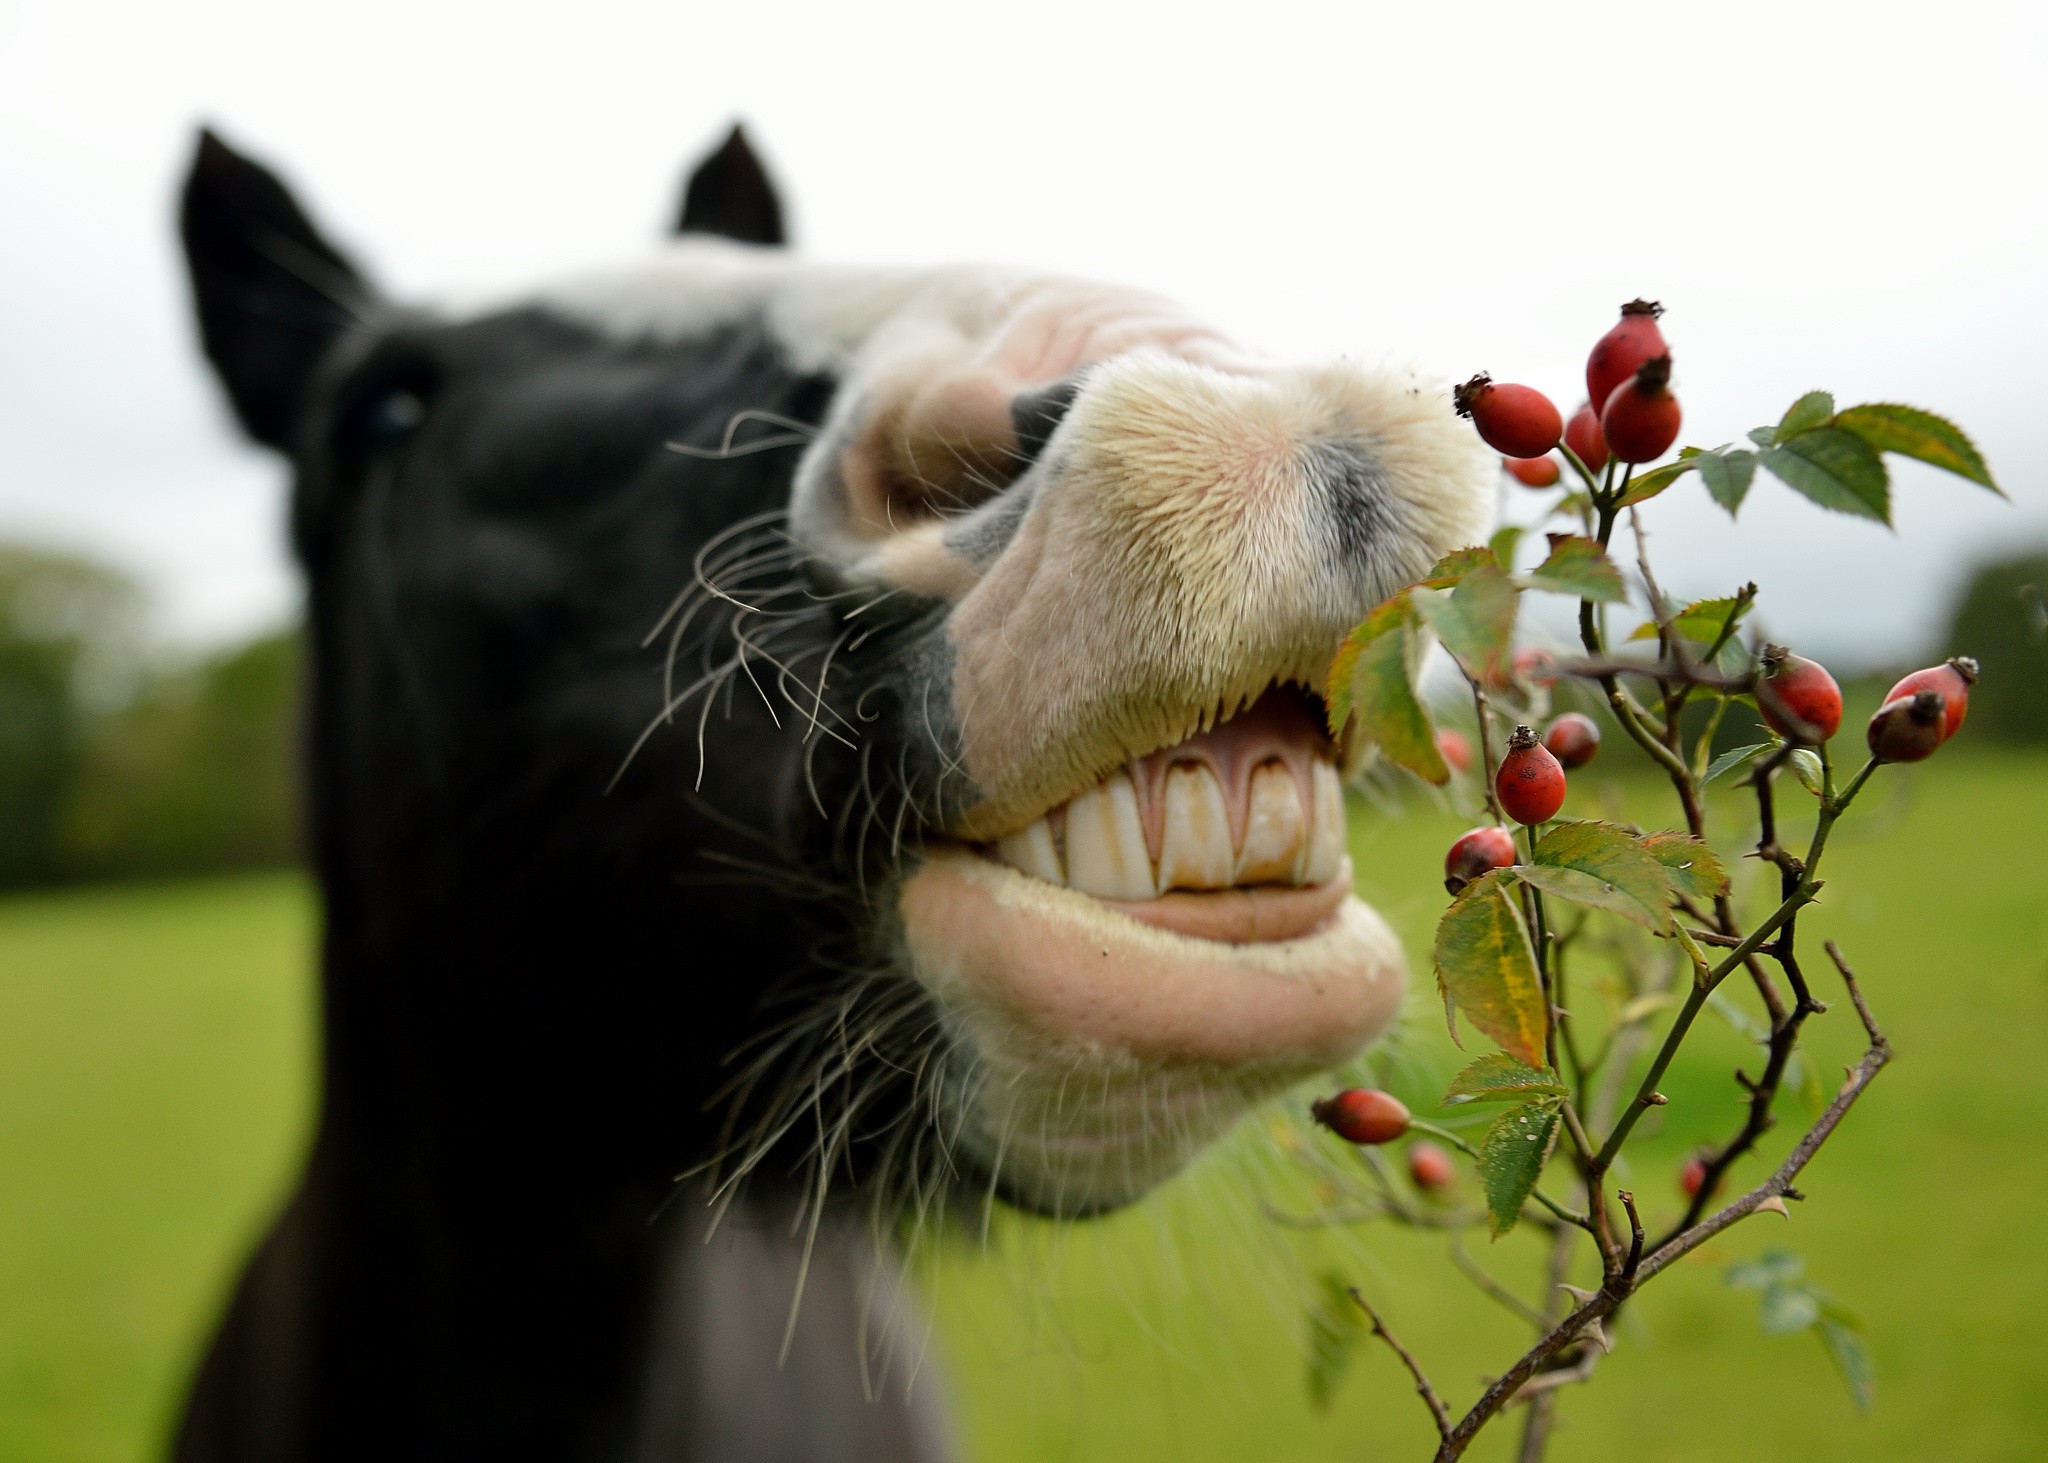 A horse sniffing berries on a branch.